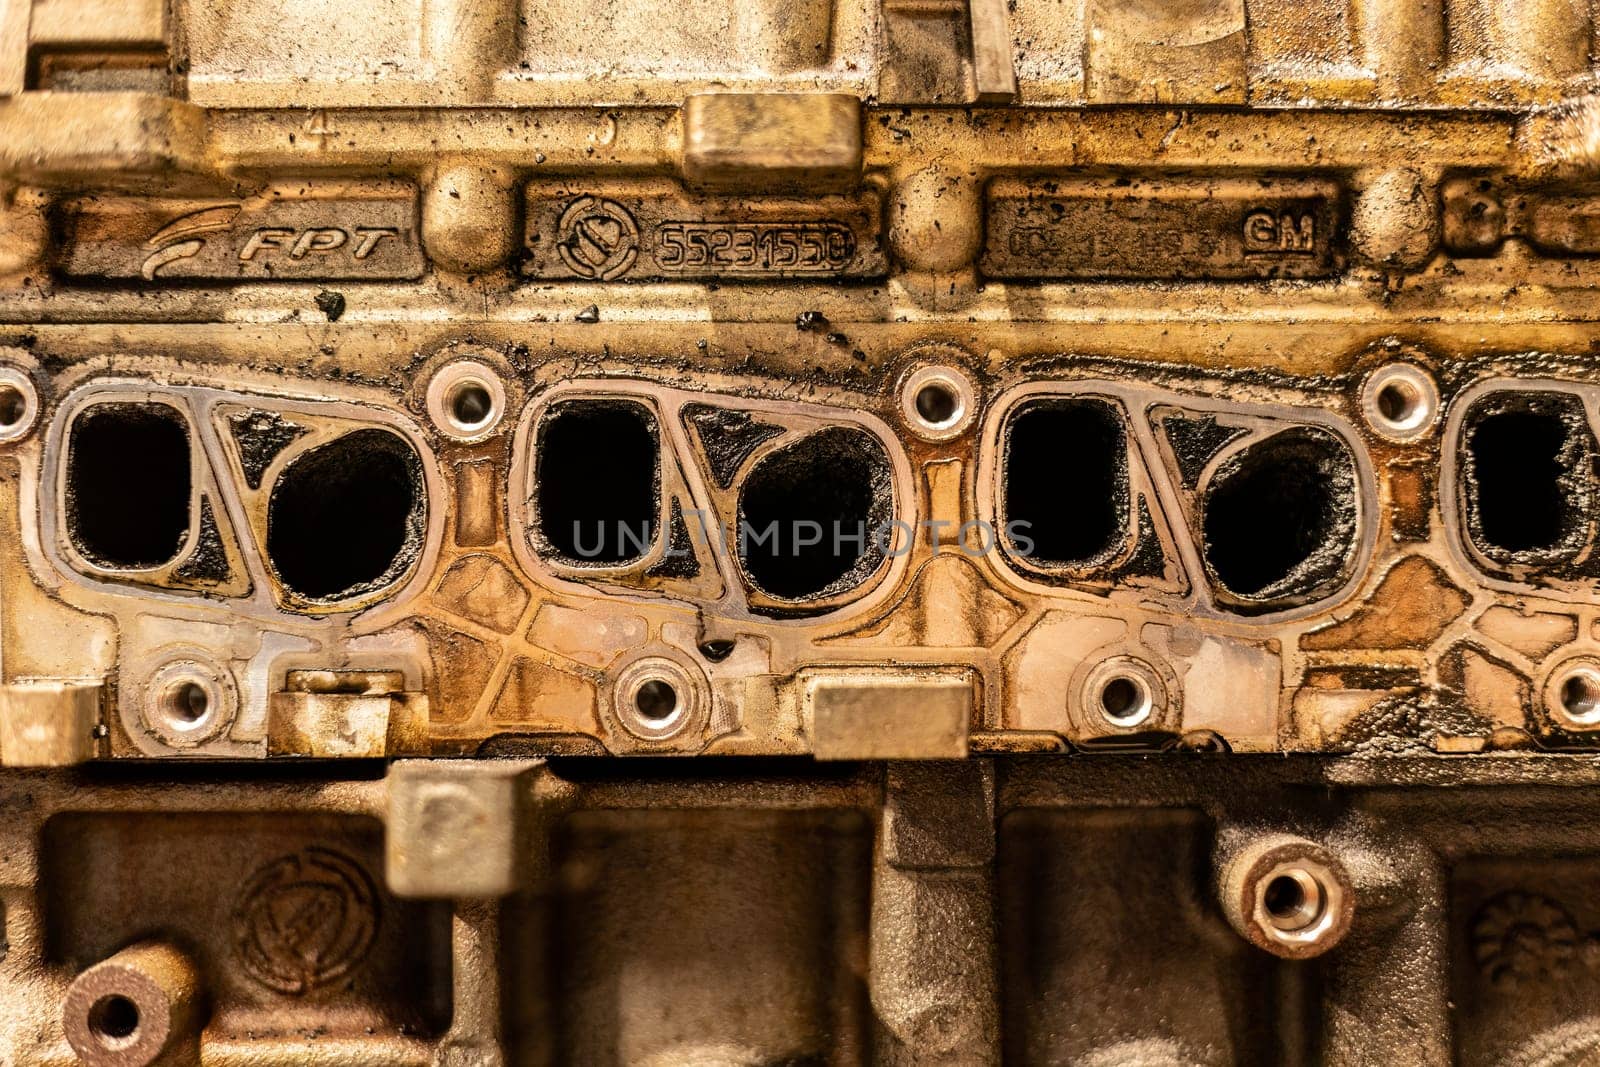 Dirty Intake Manifolds from EGR Effect by pippocarlot